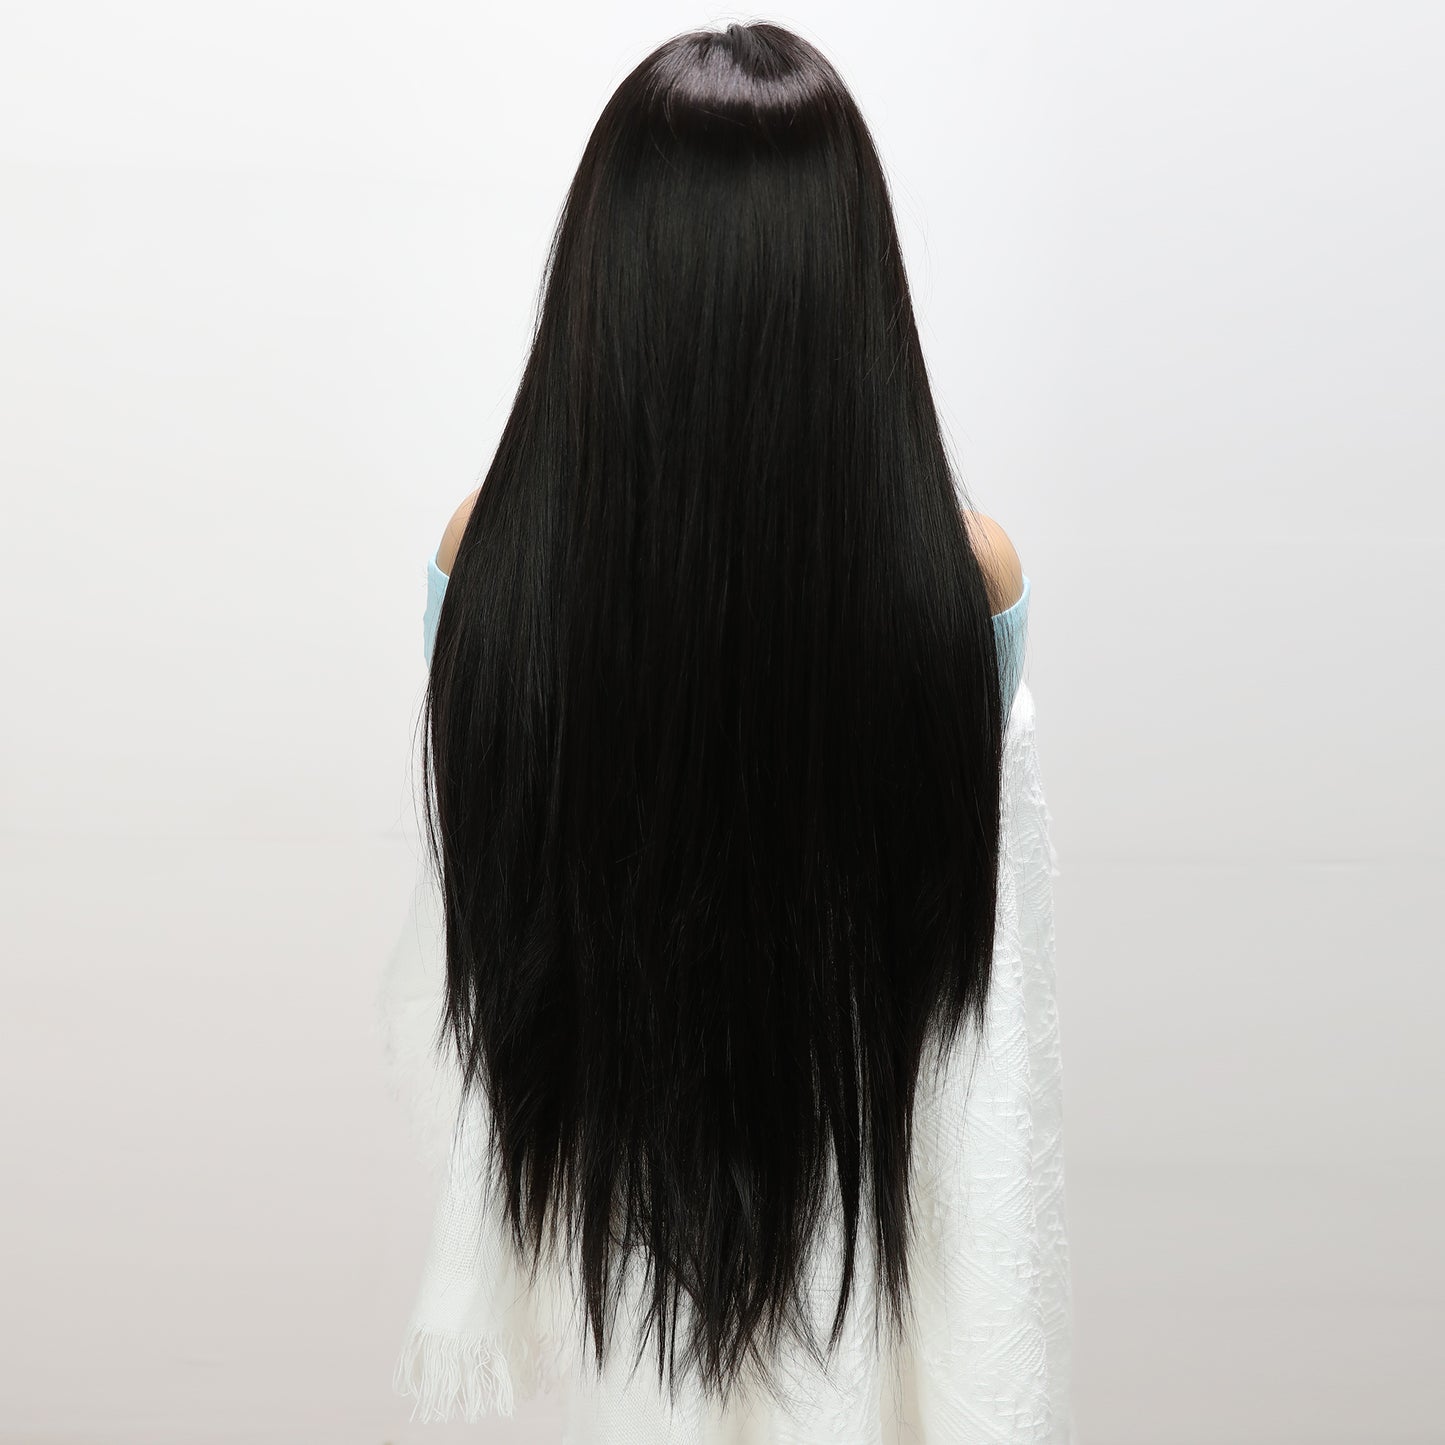 [Black Velvet] 34-inch Black Straight without Bangs (Synthetic Lace Front Wig)